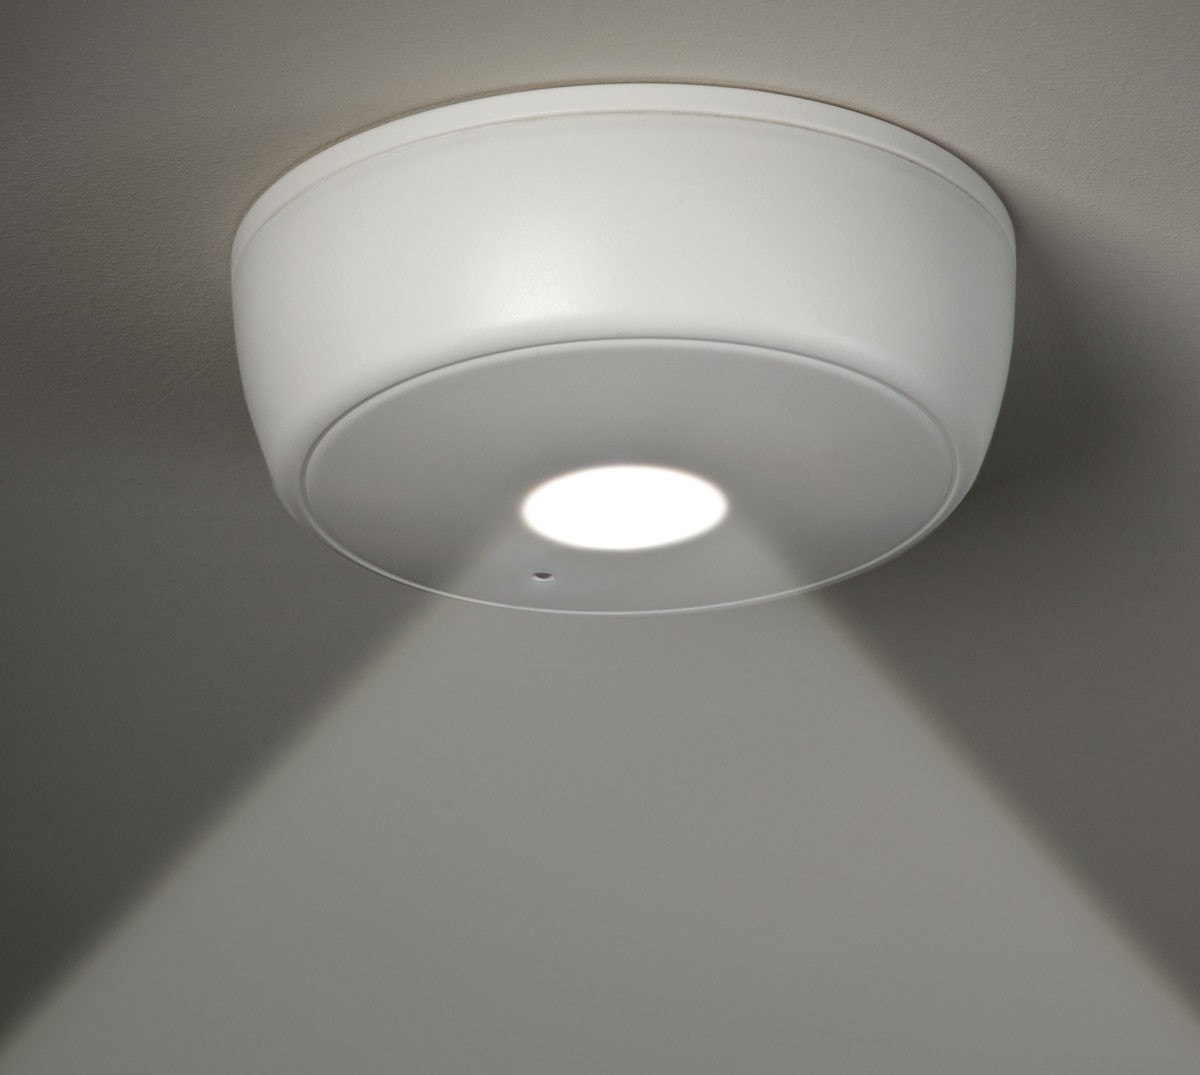 Ceiling Light Fixture With Wireless Switch